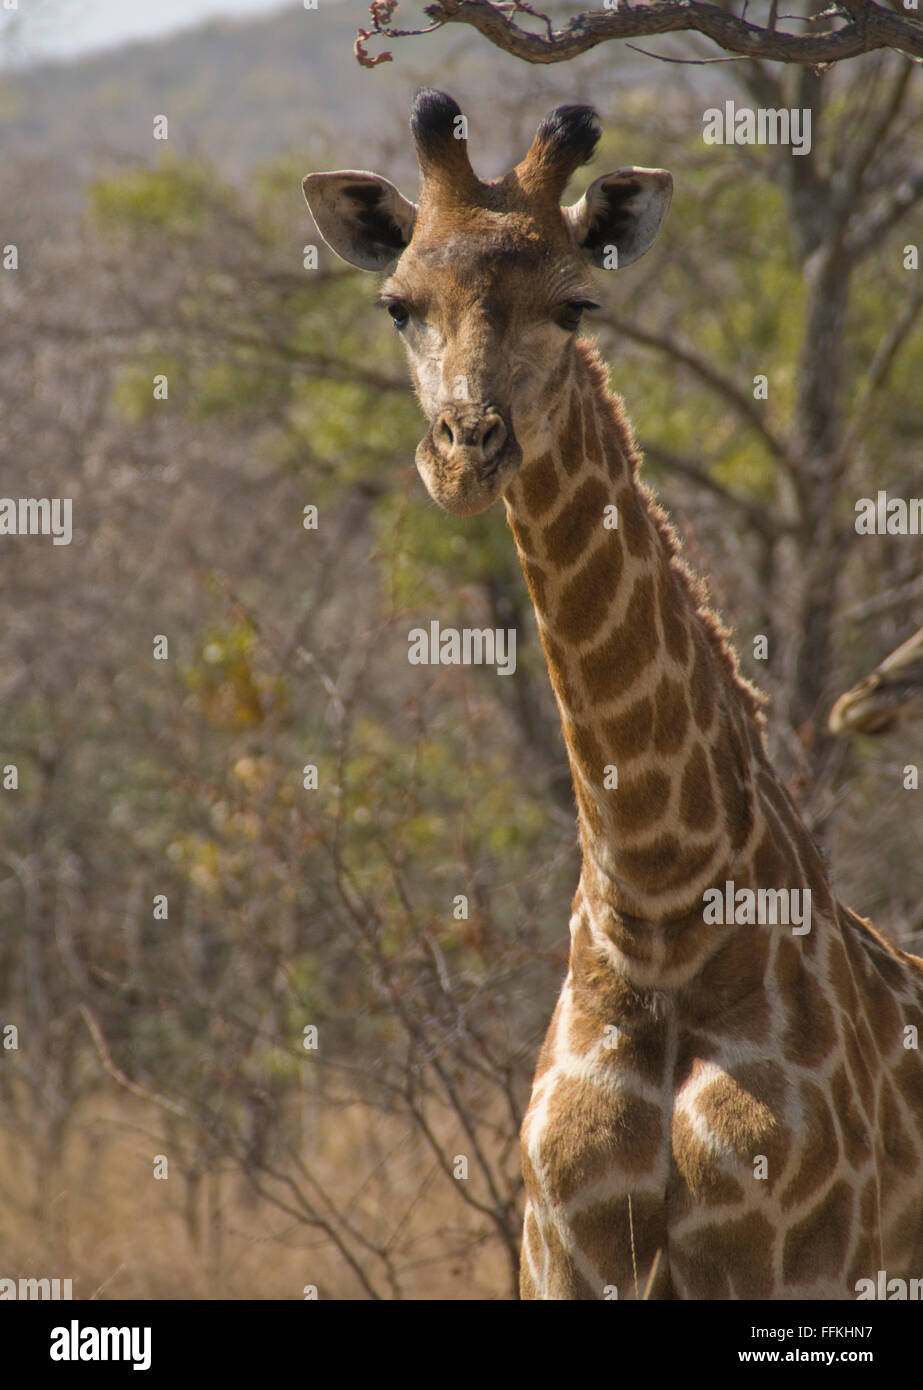 Giraffes conservation status is least concern Stock Photo